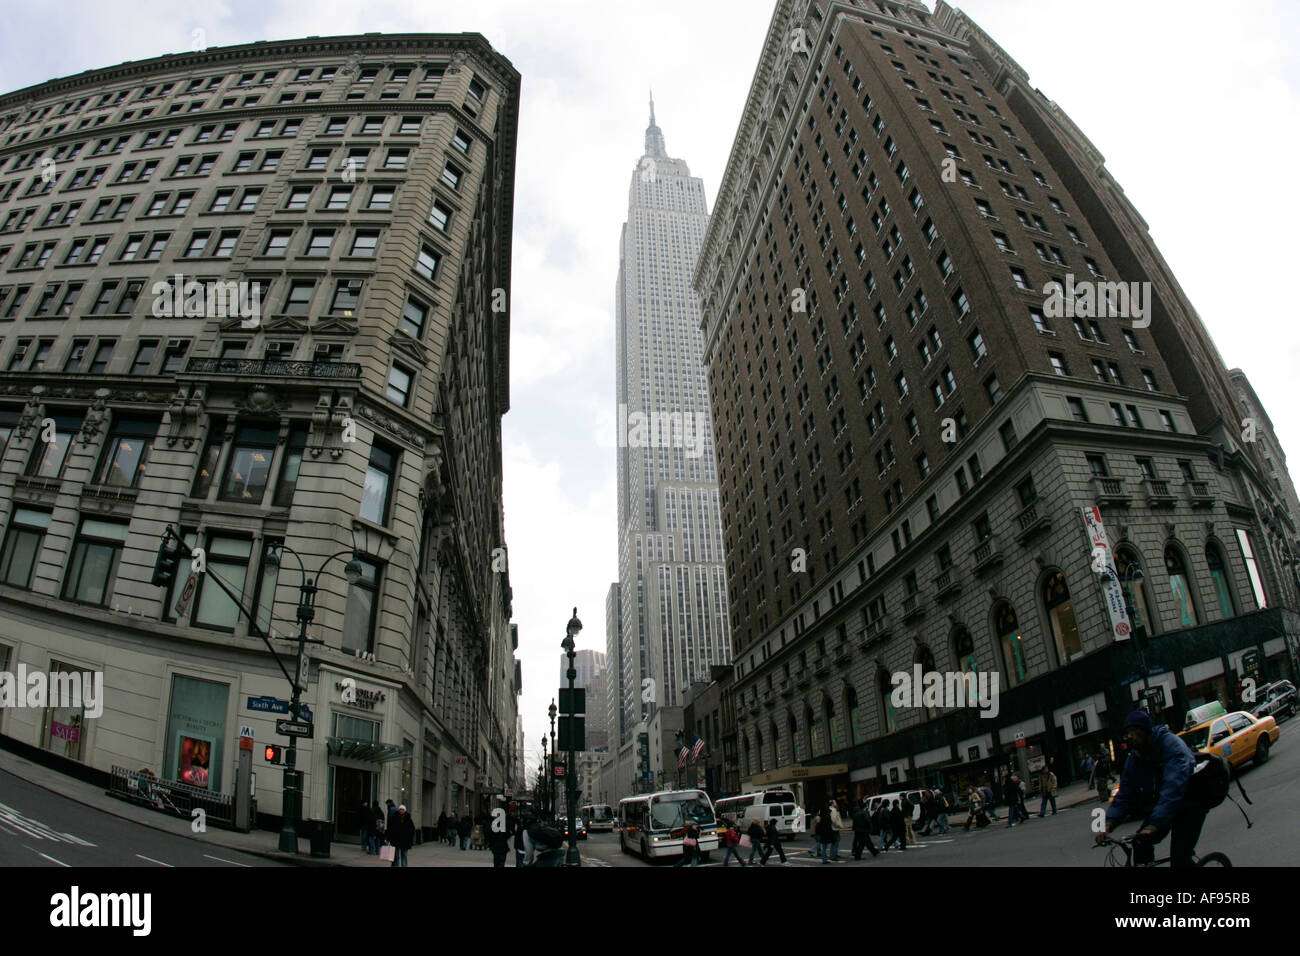 fisheye shot View of the empire state building from West 34th Street and Broadway junction including traffic Stock Photo